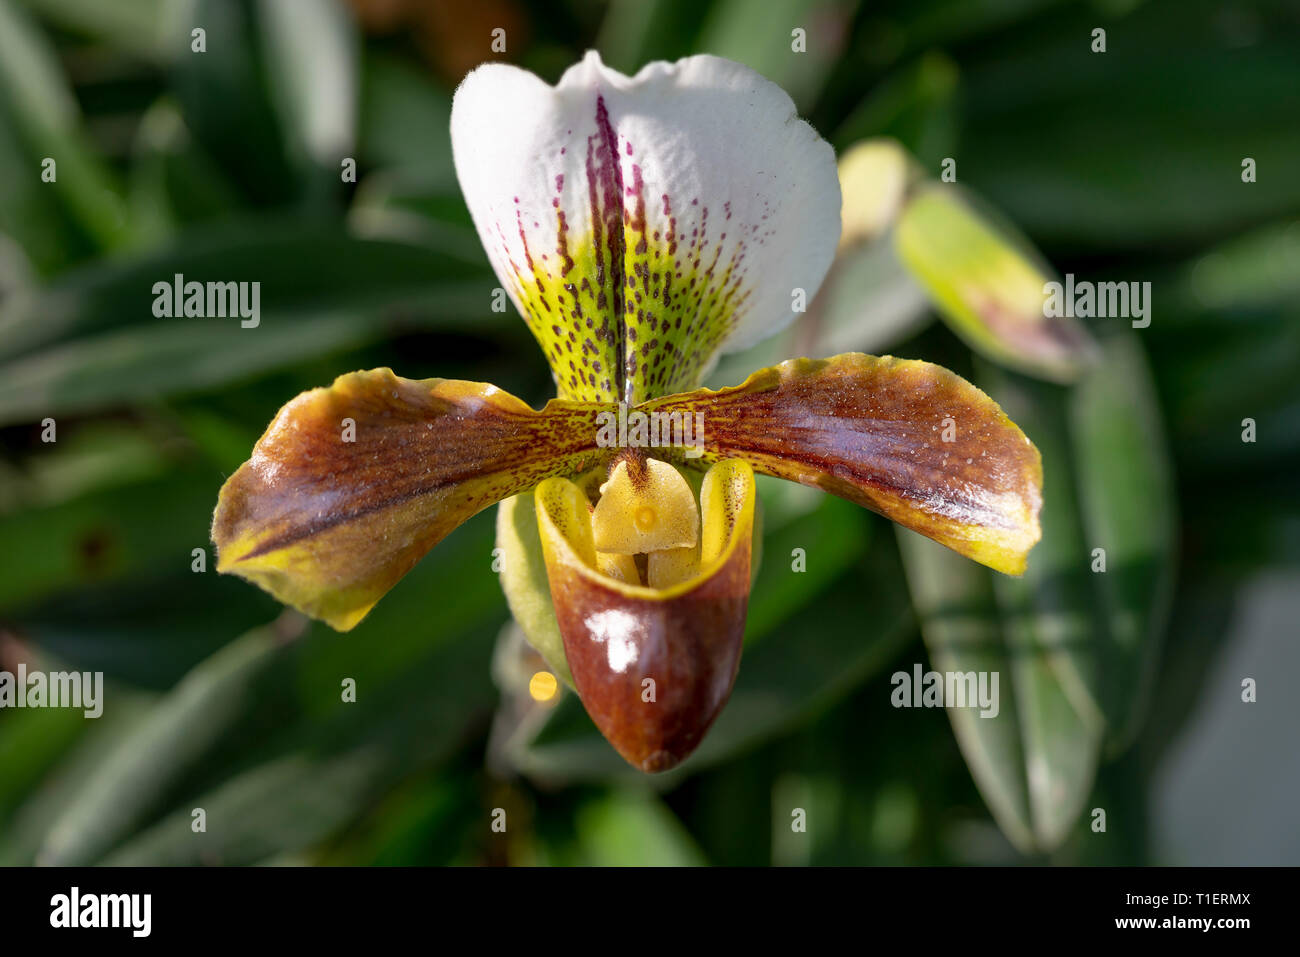 Paphiopedilum delenatii, Vietnam wild orchid, white and pink flower. Beautiful orchid bloom, close-up detail. Stock Photo